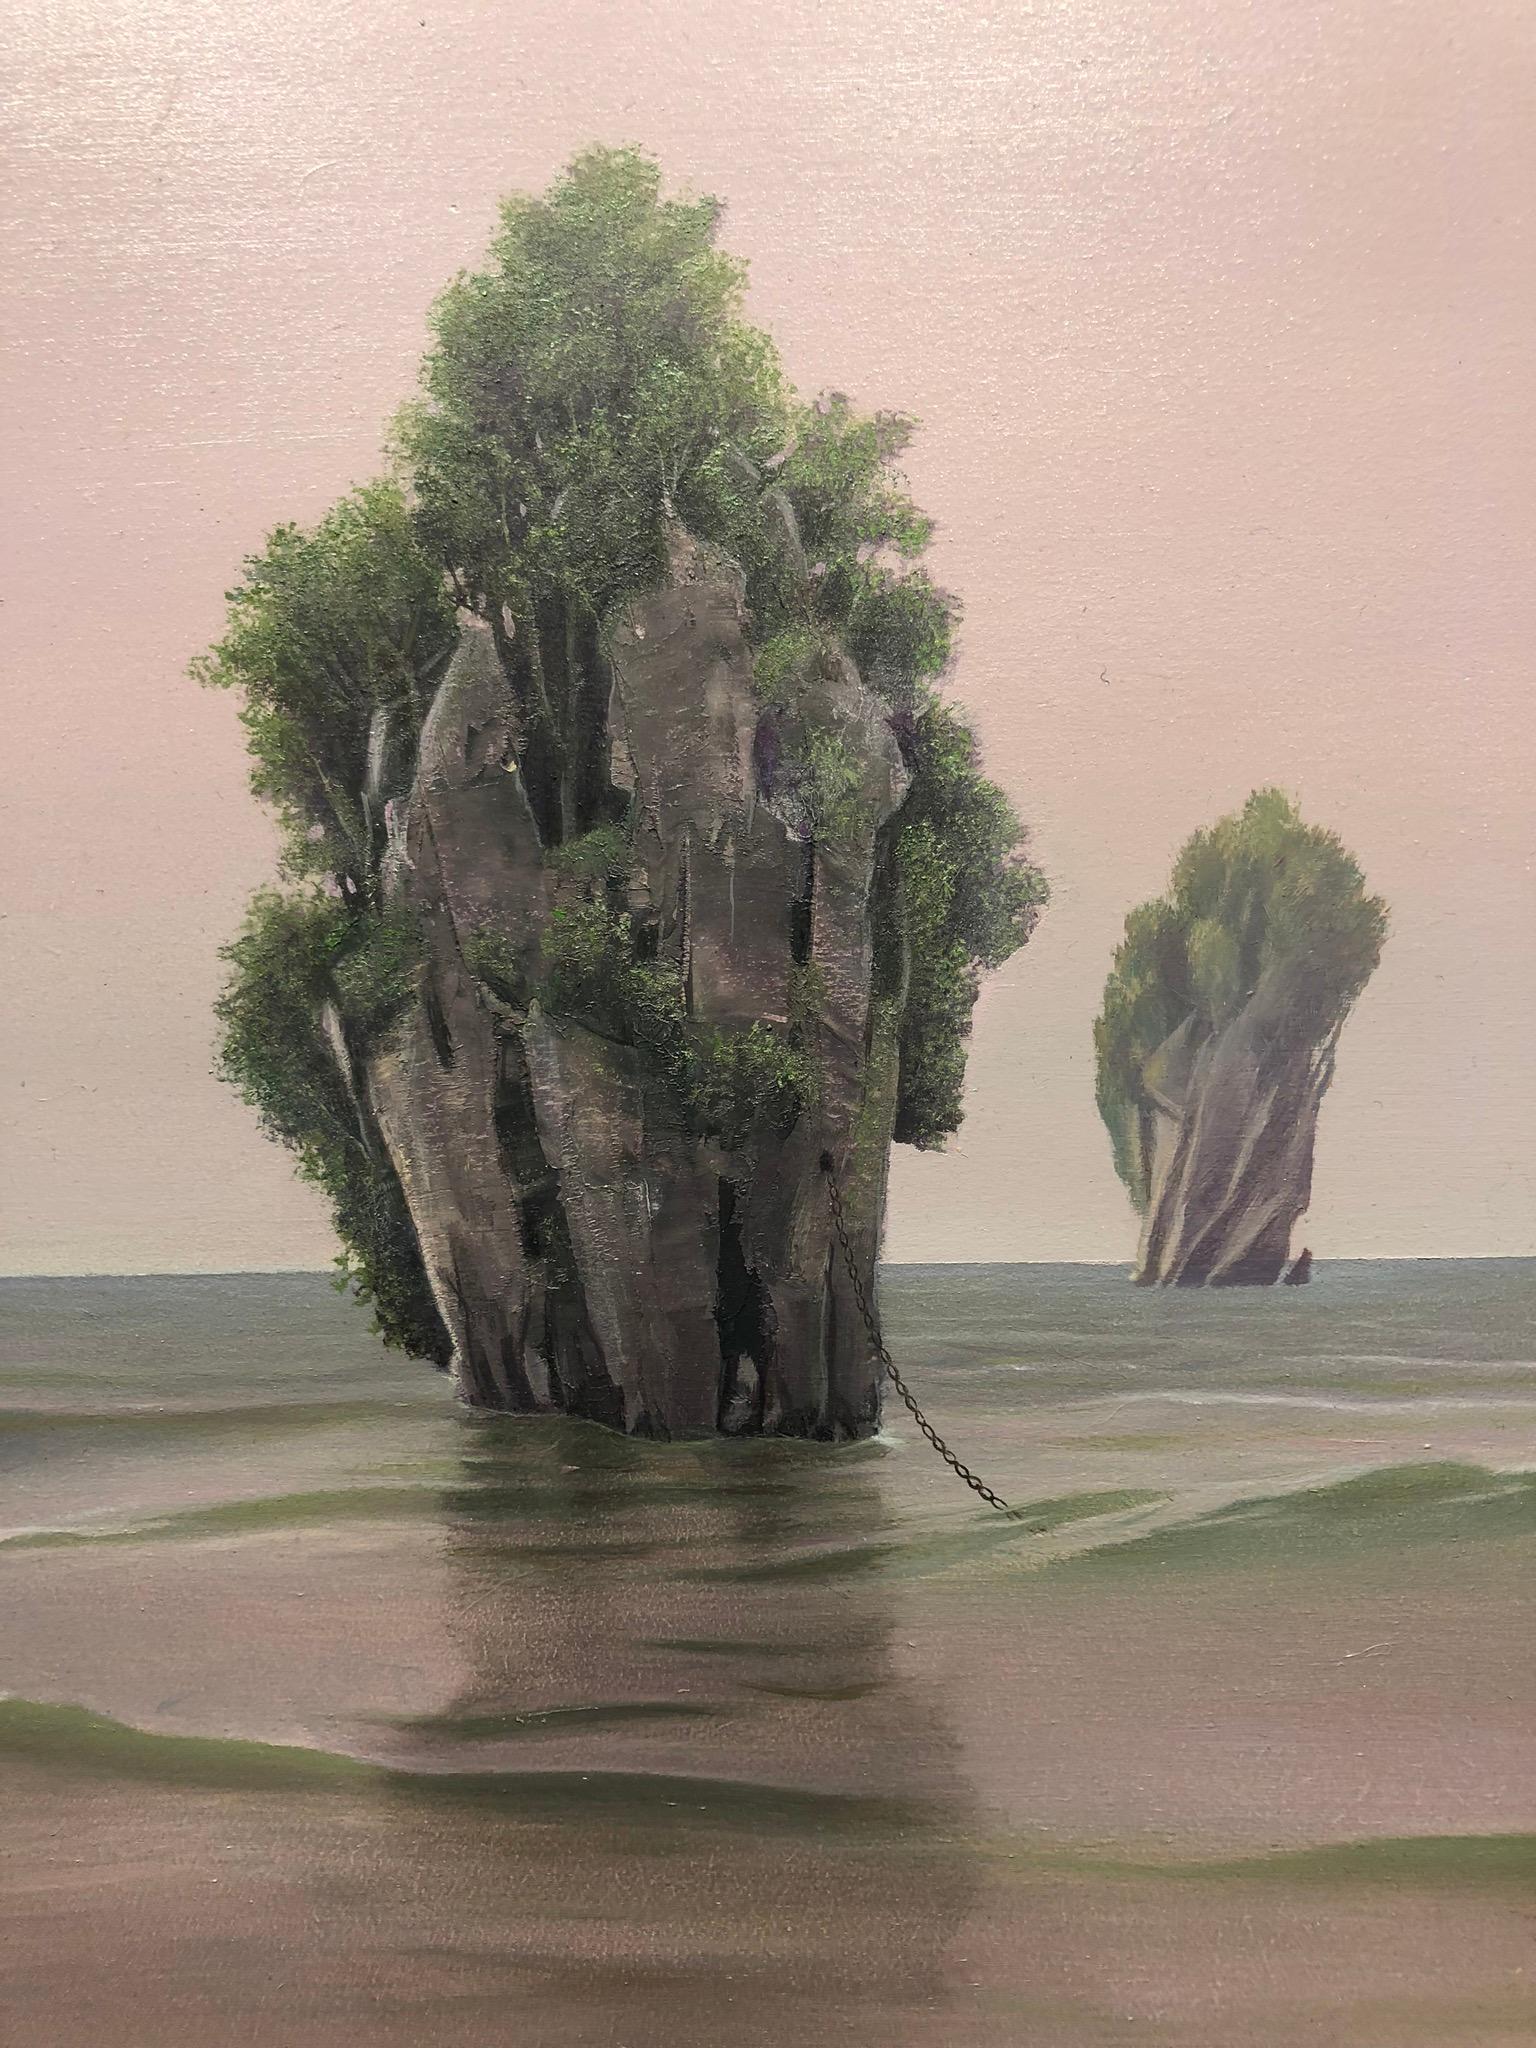 Beginning of a Dream, Surreal Ocean Landscape in Shades of Pink and Green - Gray Landscape Painting by René Monzón Relova “Pozas”